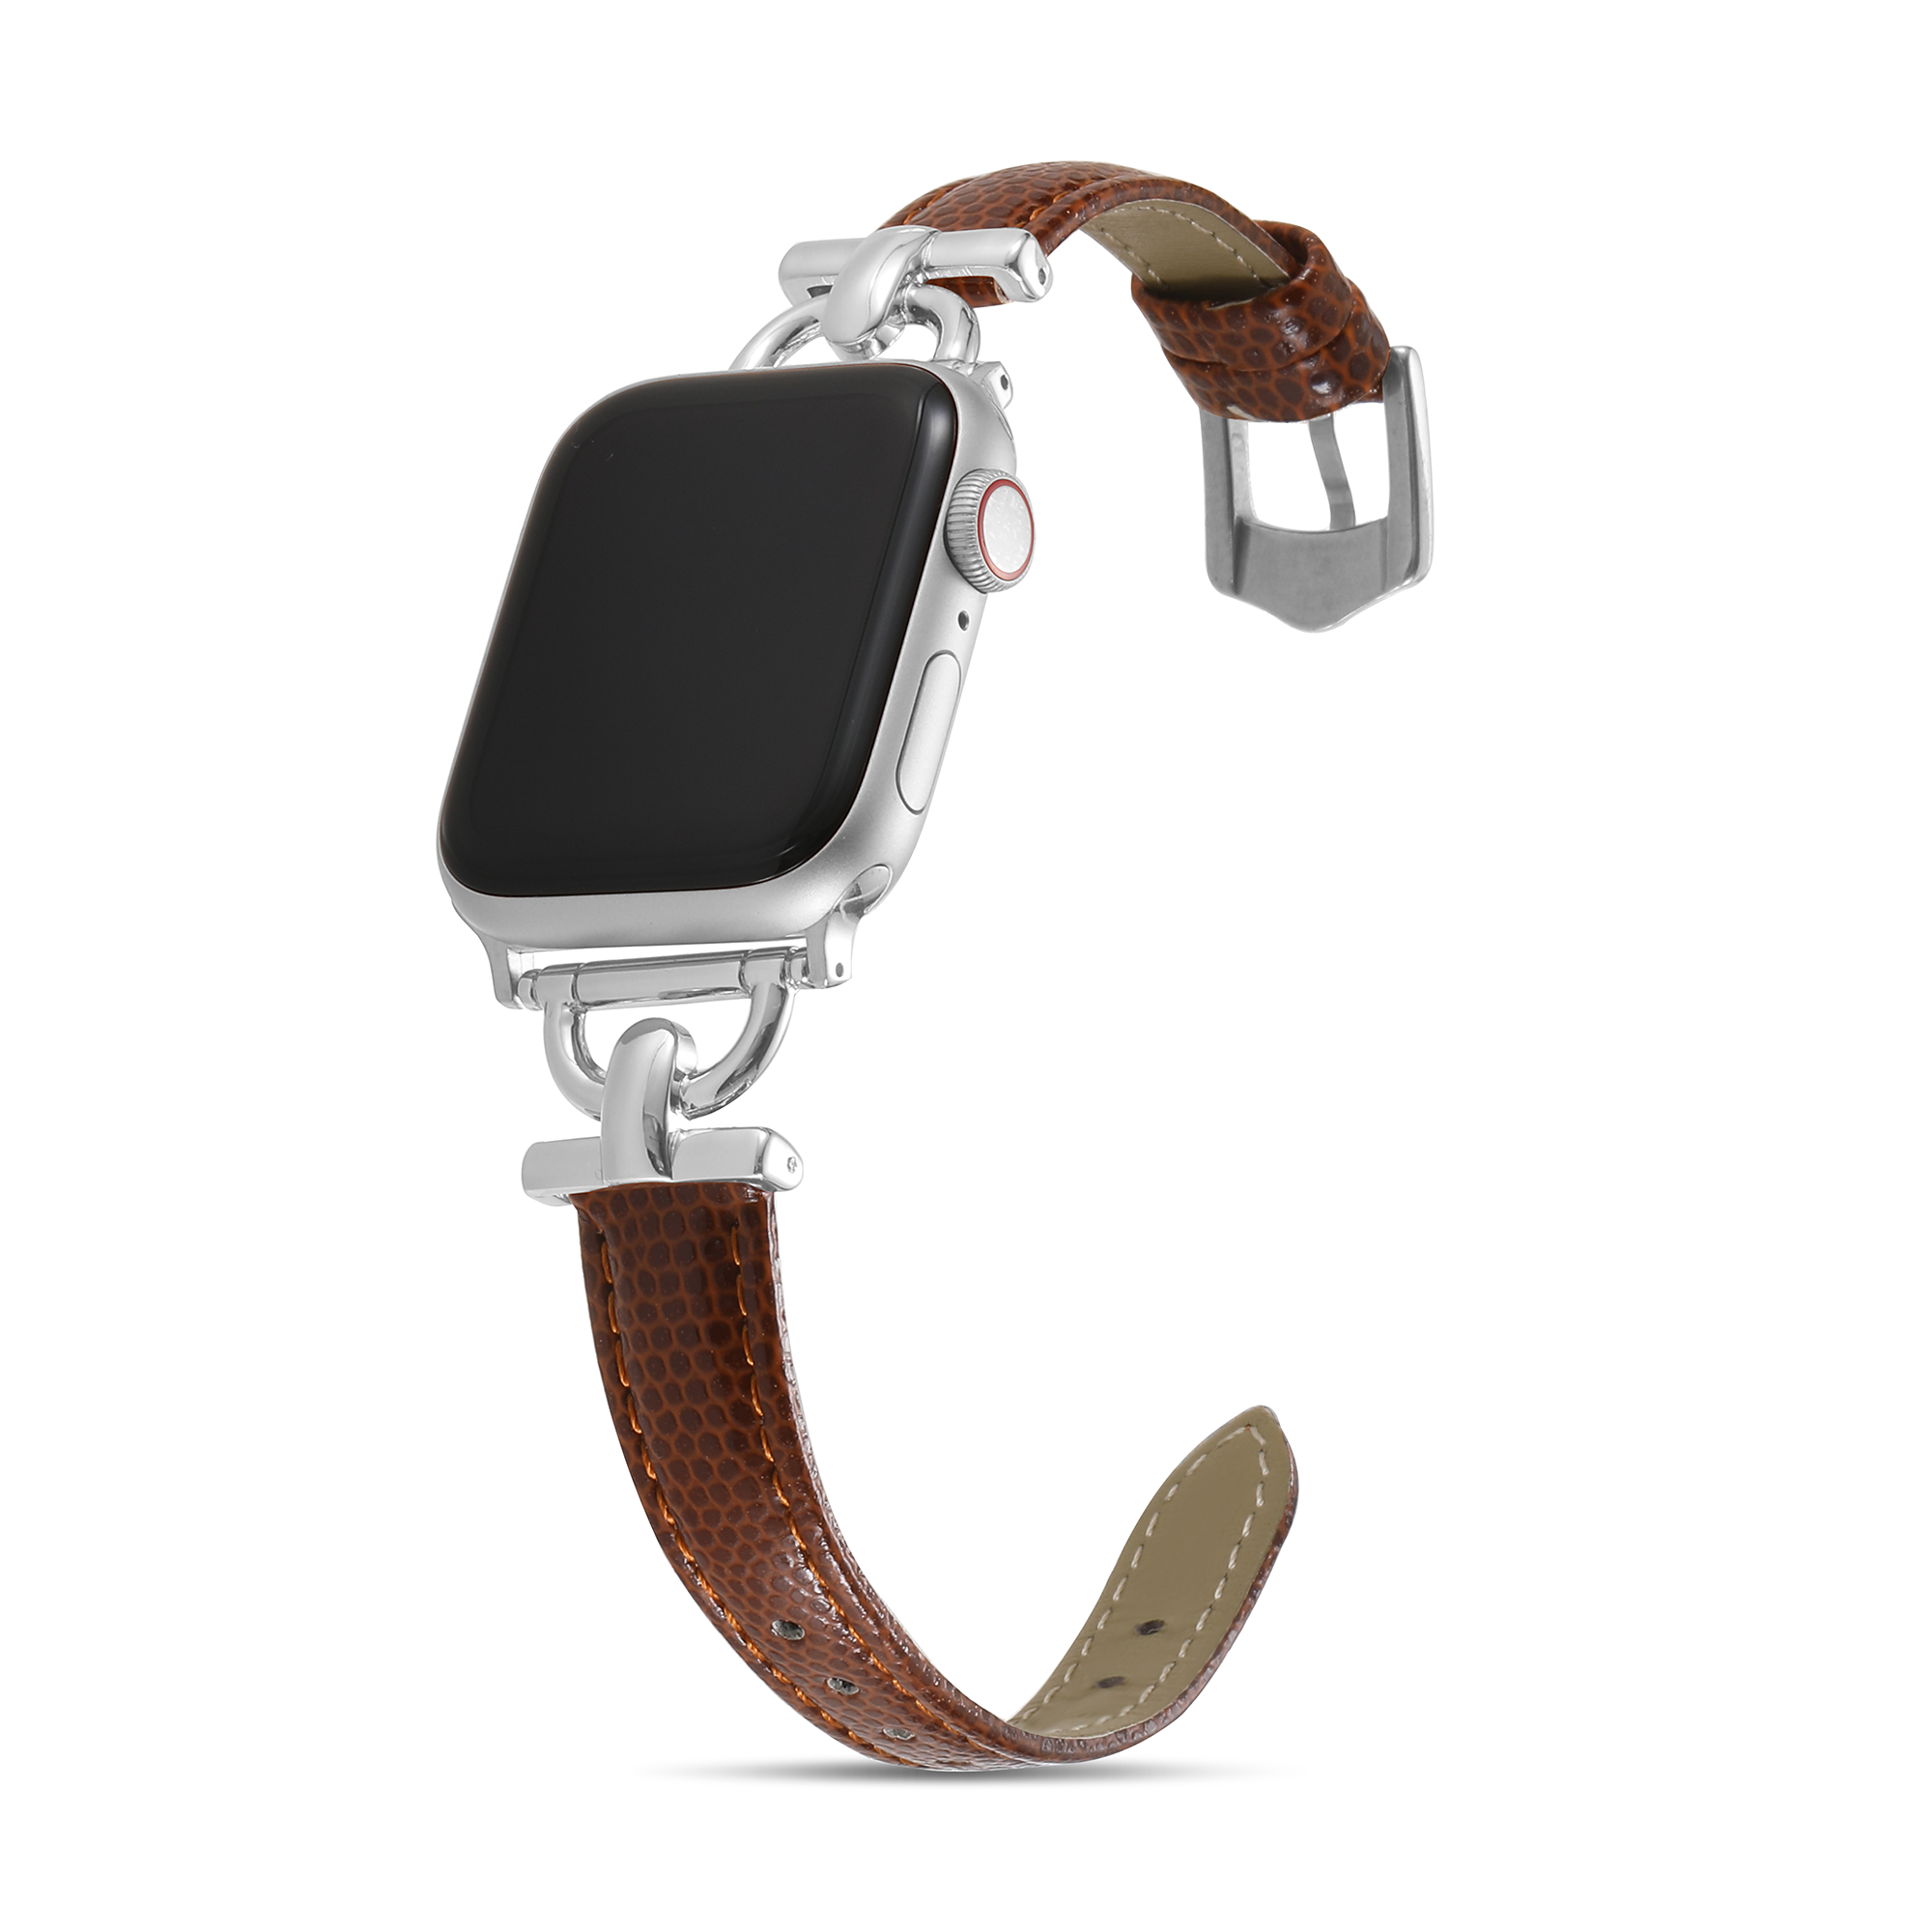 [Apple Watch] Vogue Leather Link